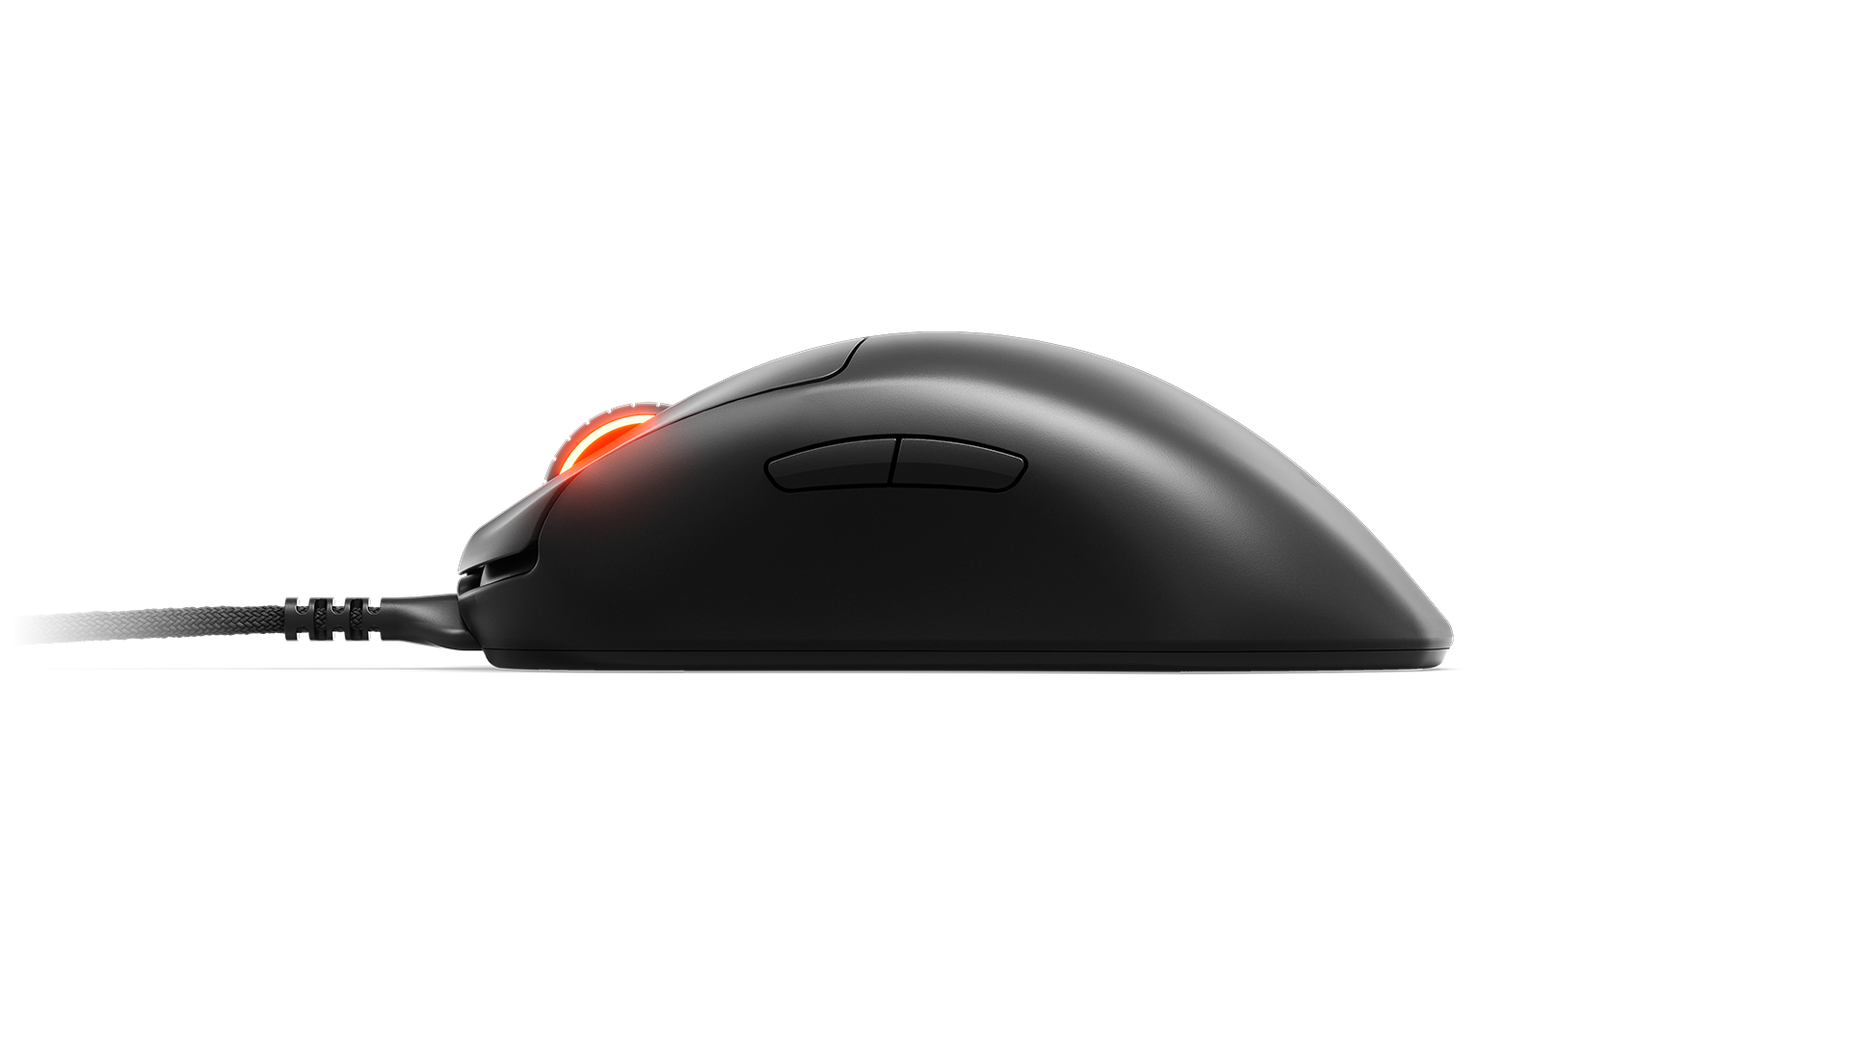 
 A side view of the Prime mouse.
 